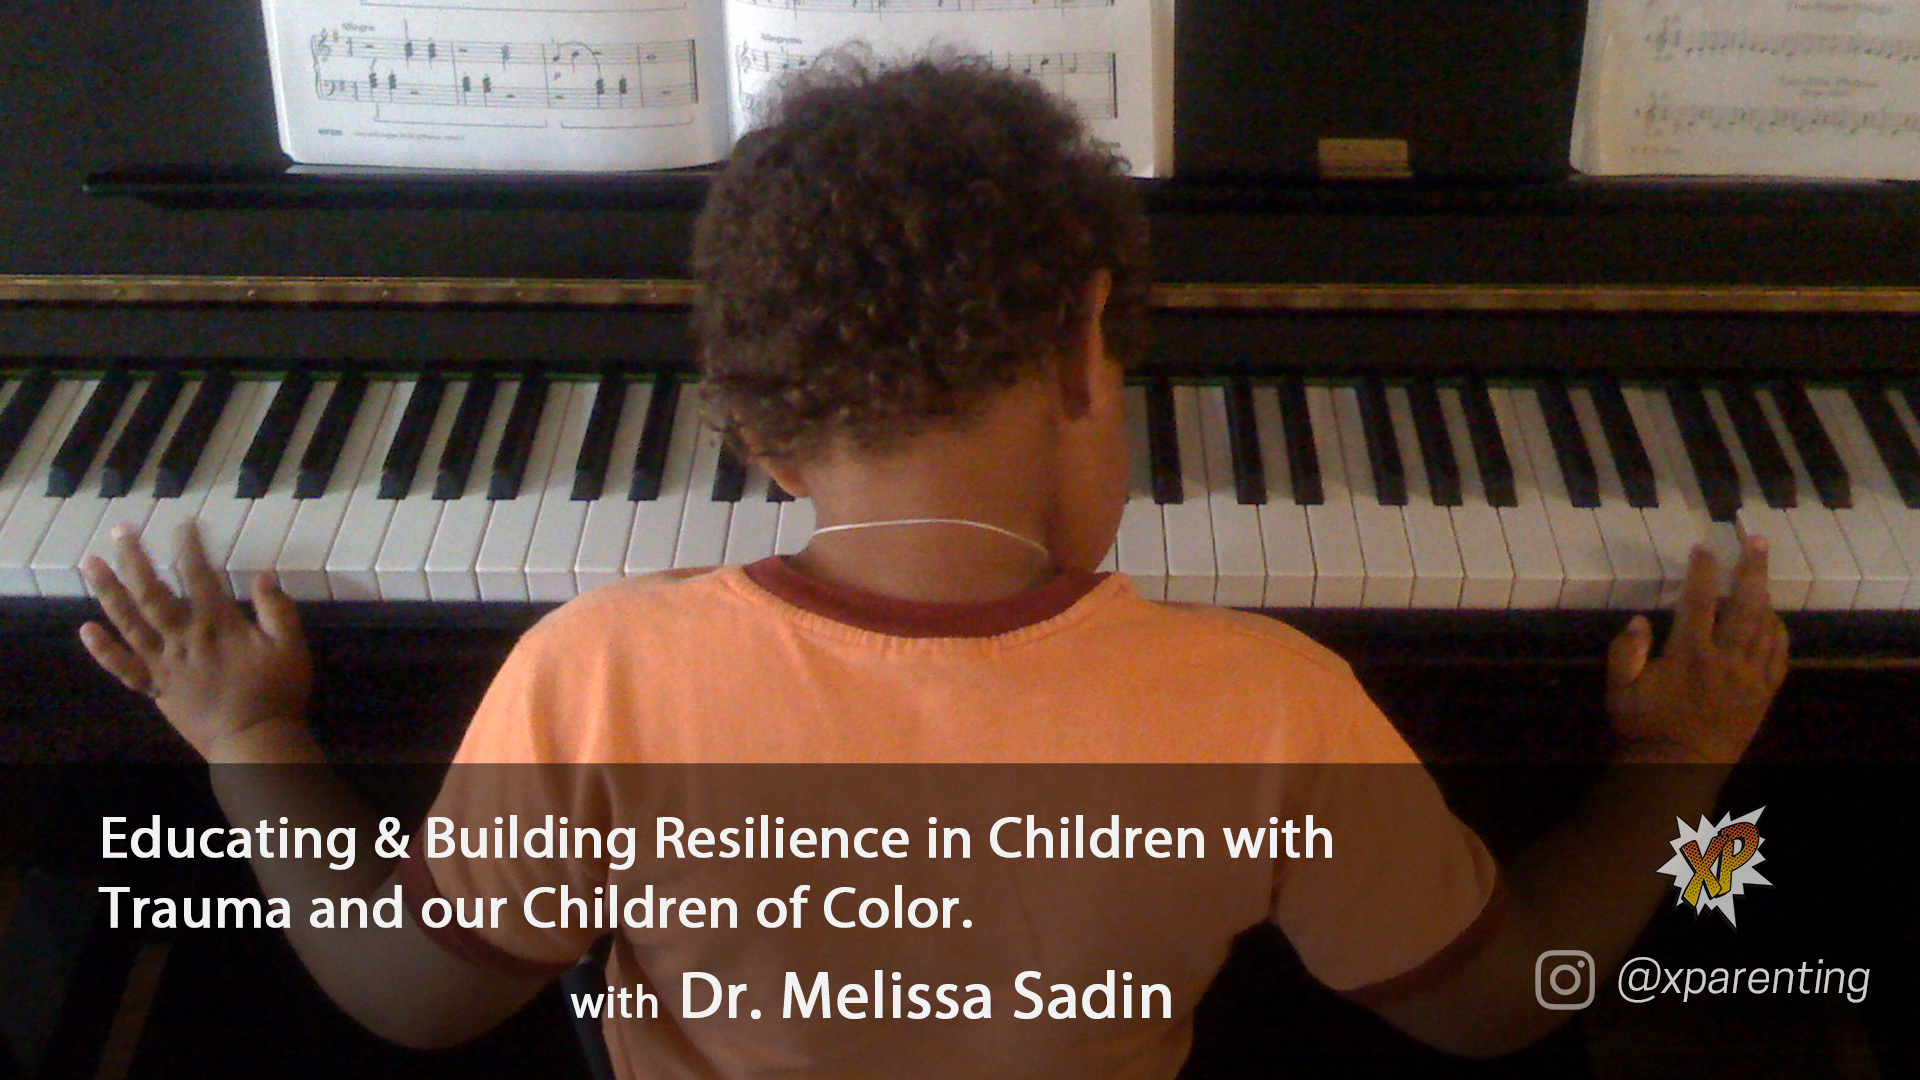 Educating & Building Resilience in Children with Trauma and our Children of Color